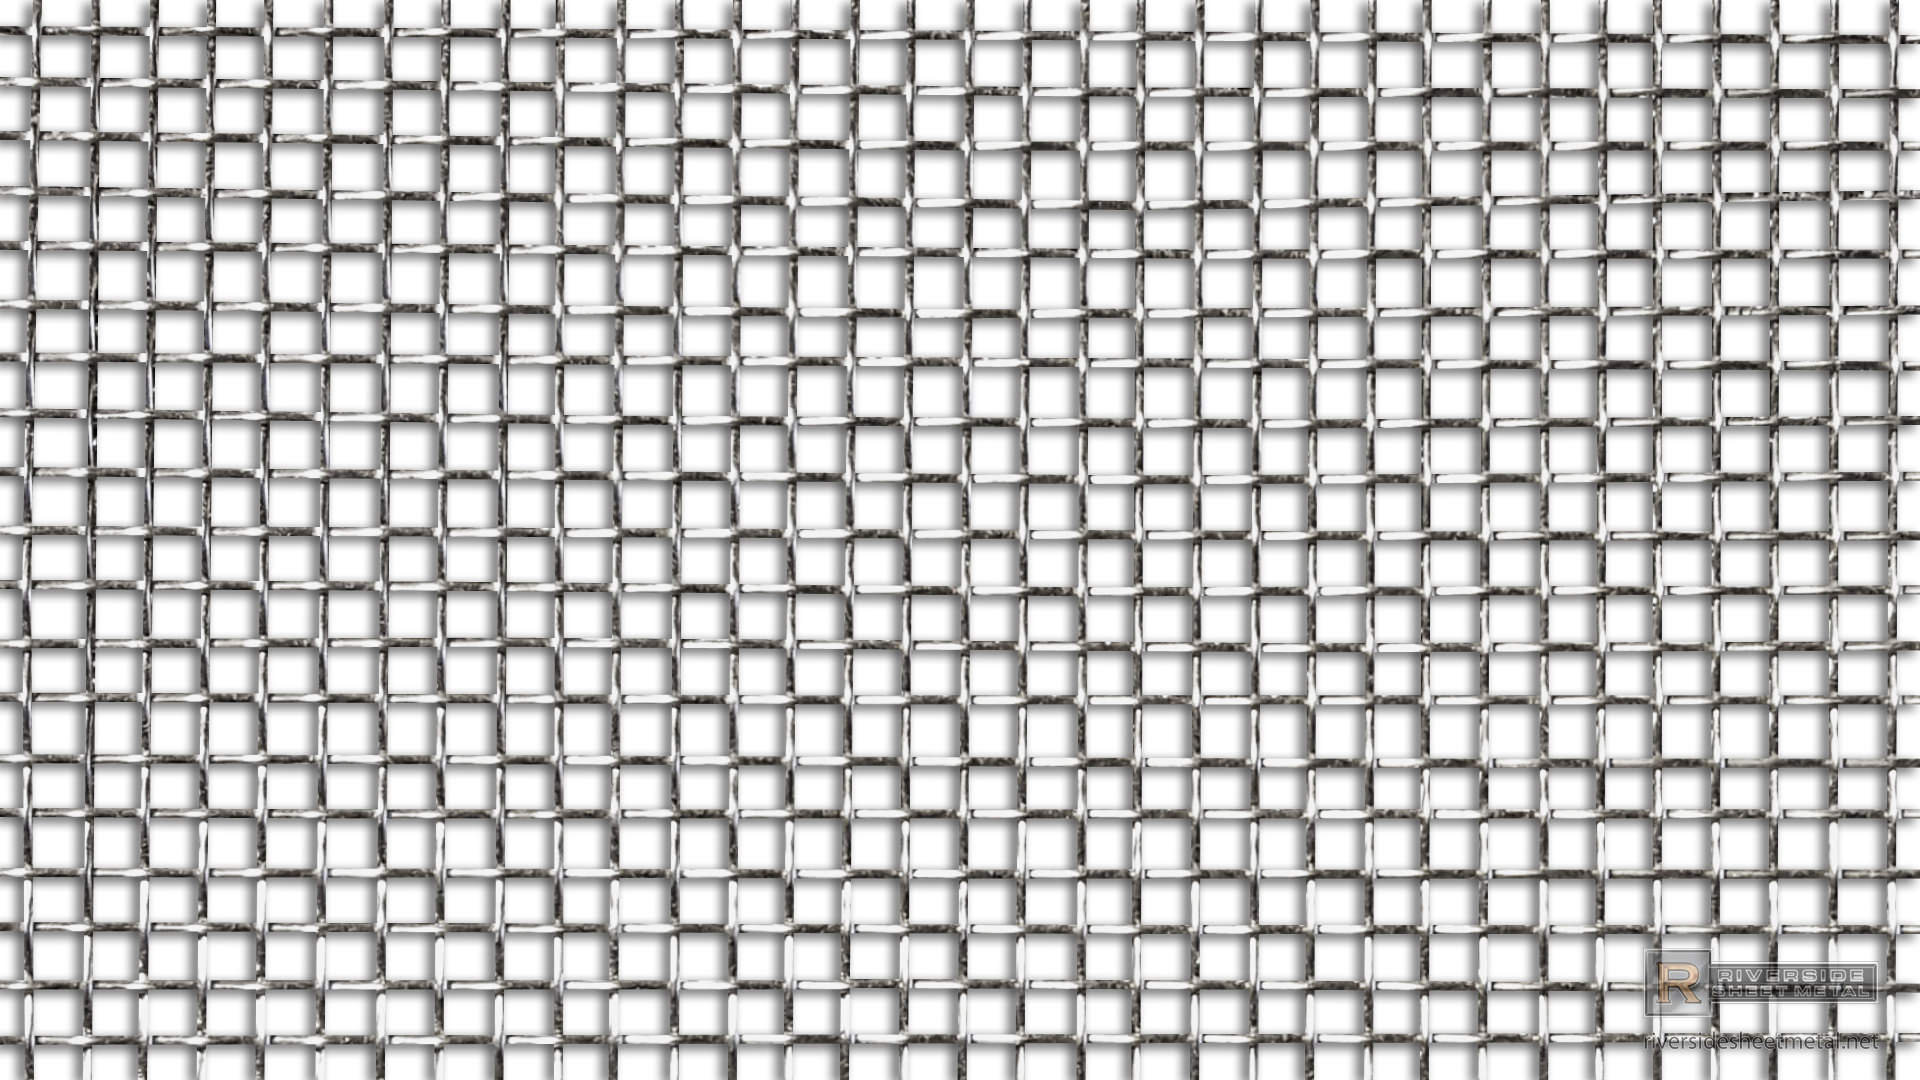 Stainless Steel Mesh - 1/8 x 1/8 and 0.5 x 0.5